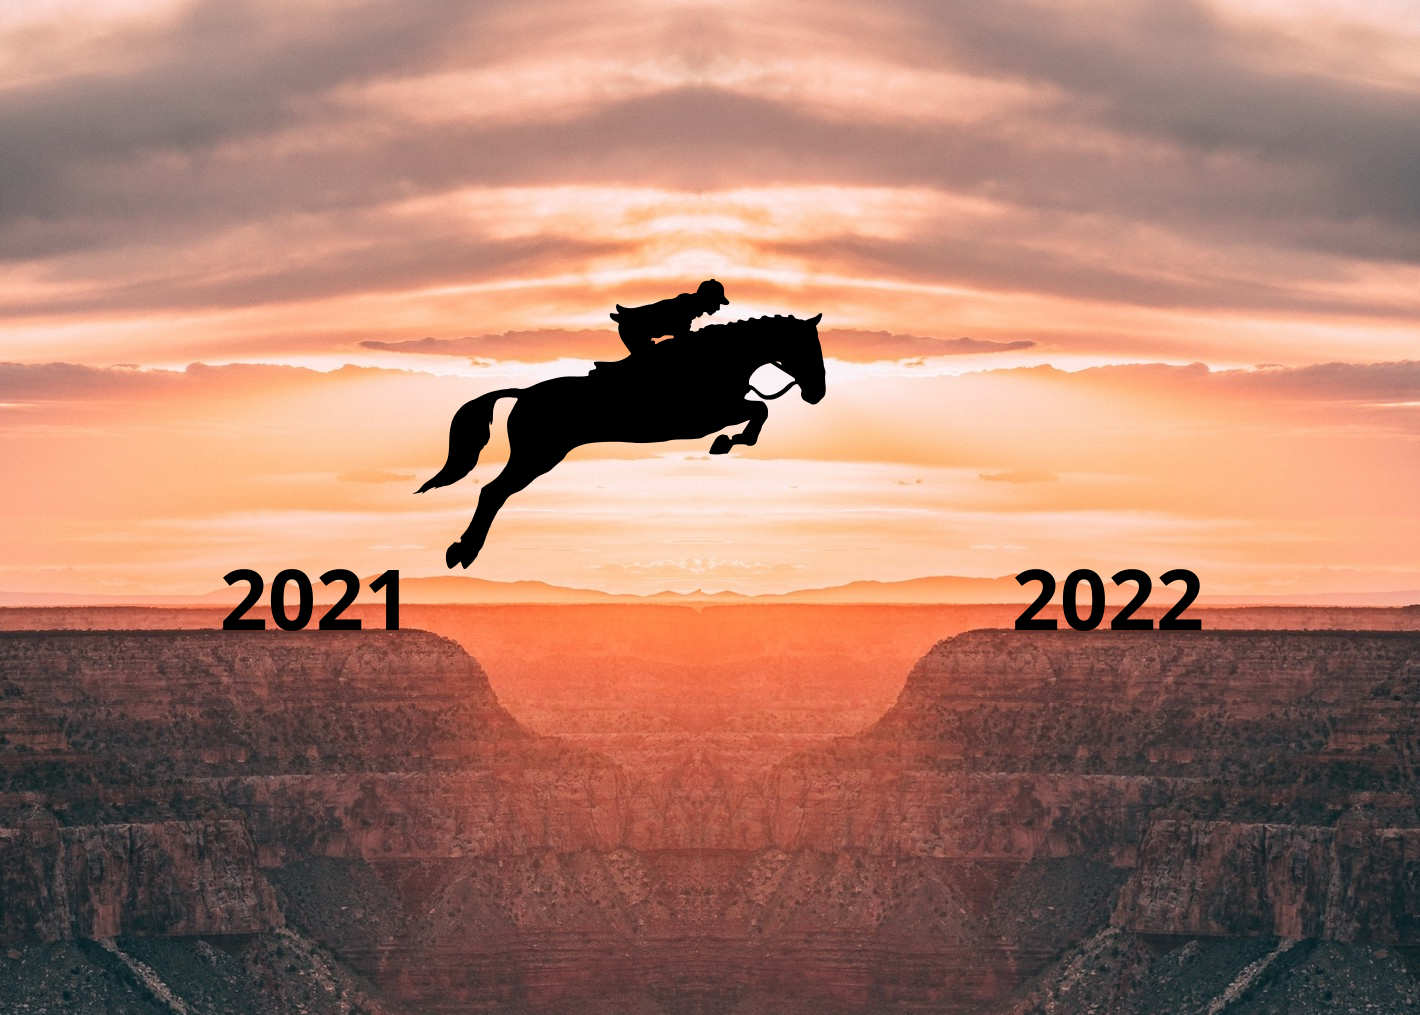 Horse jumping canyon from 2021 to 2022